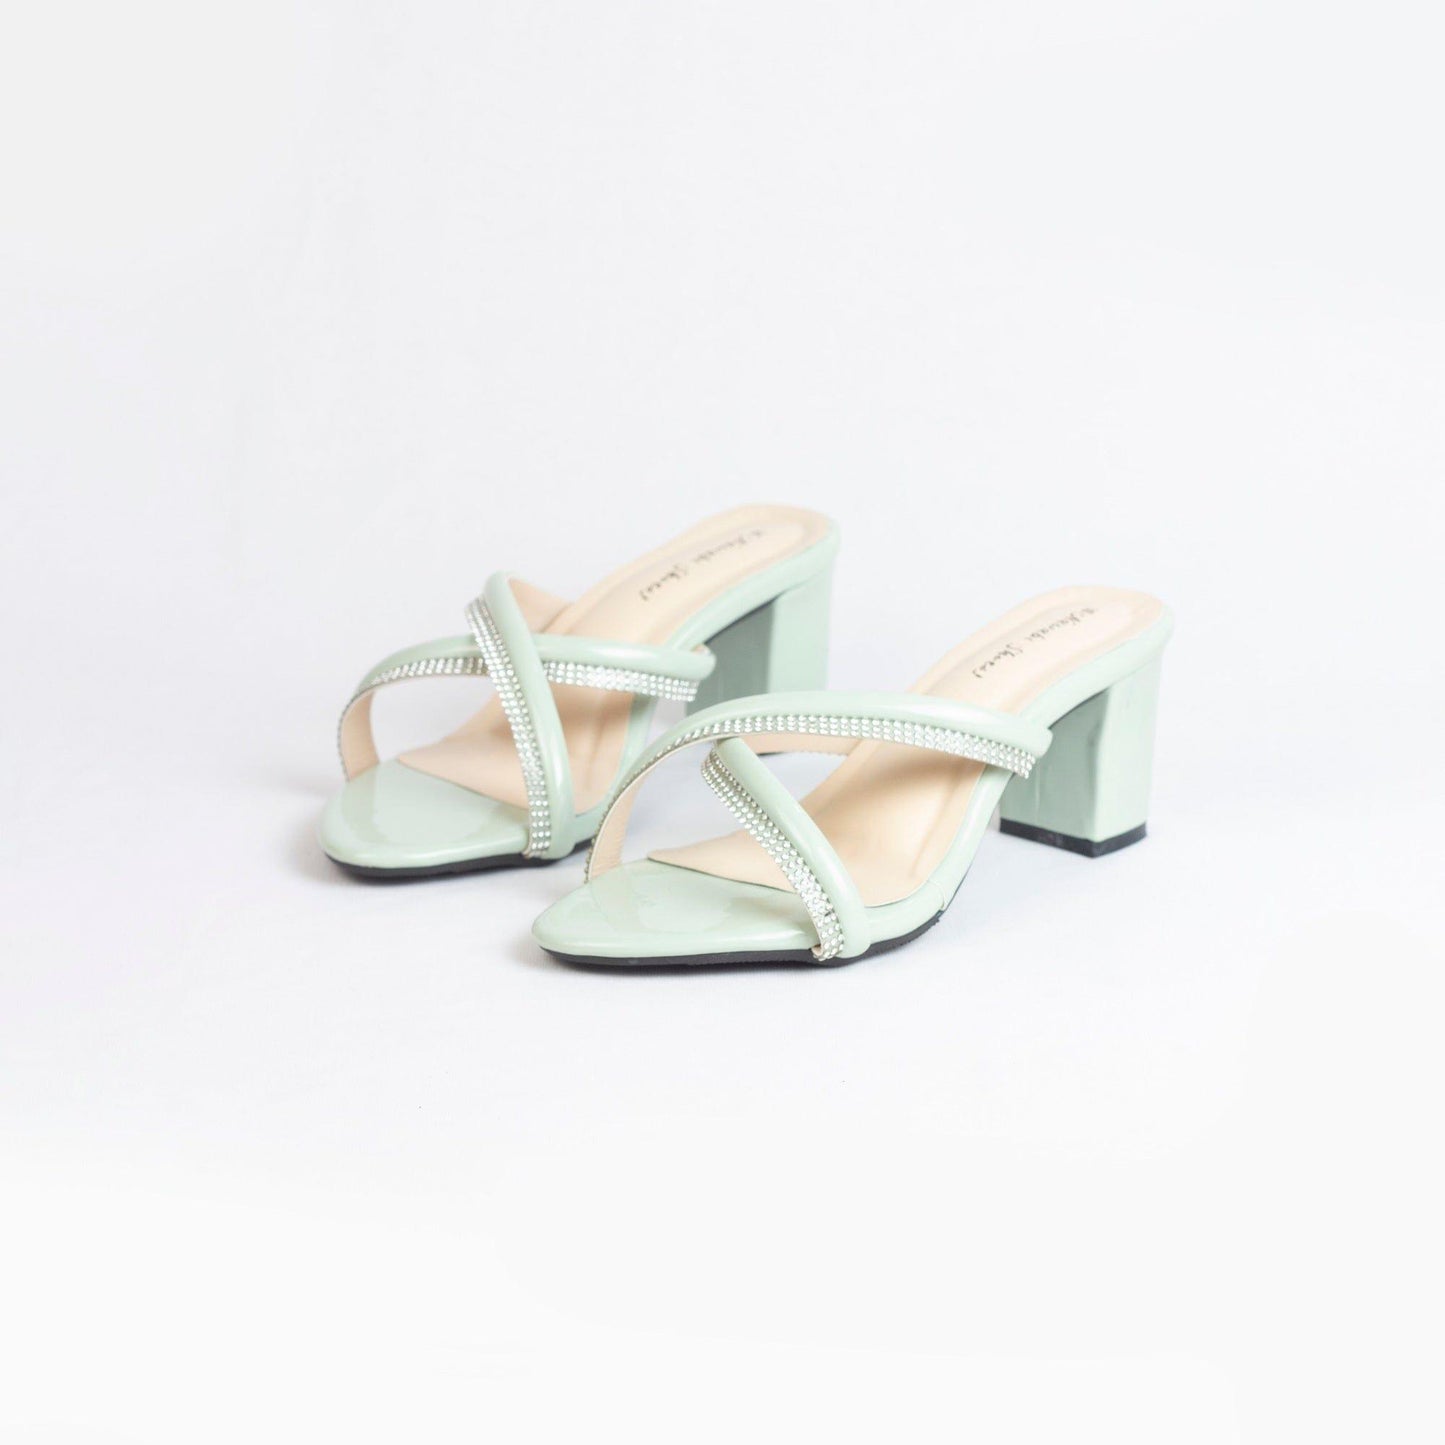 Nawabi Shoes BD Shoes 35 / aquamarine Heels Block for Women: The Must-Have for Your Shoe Collection